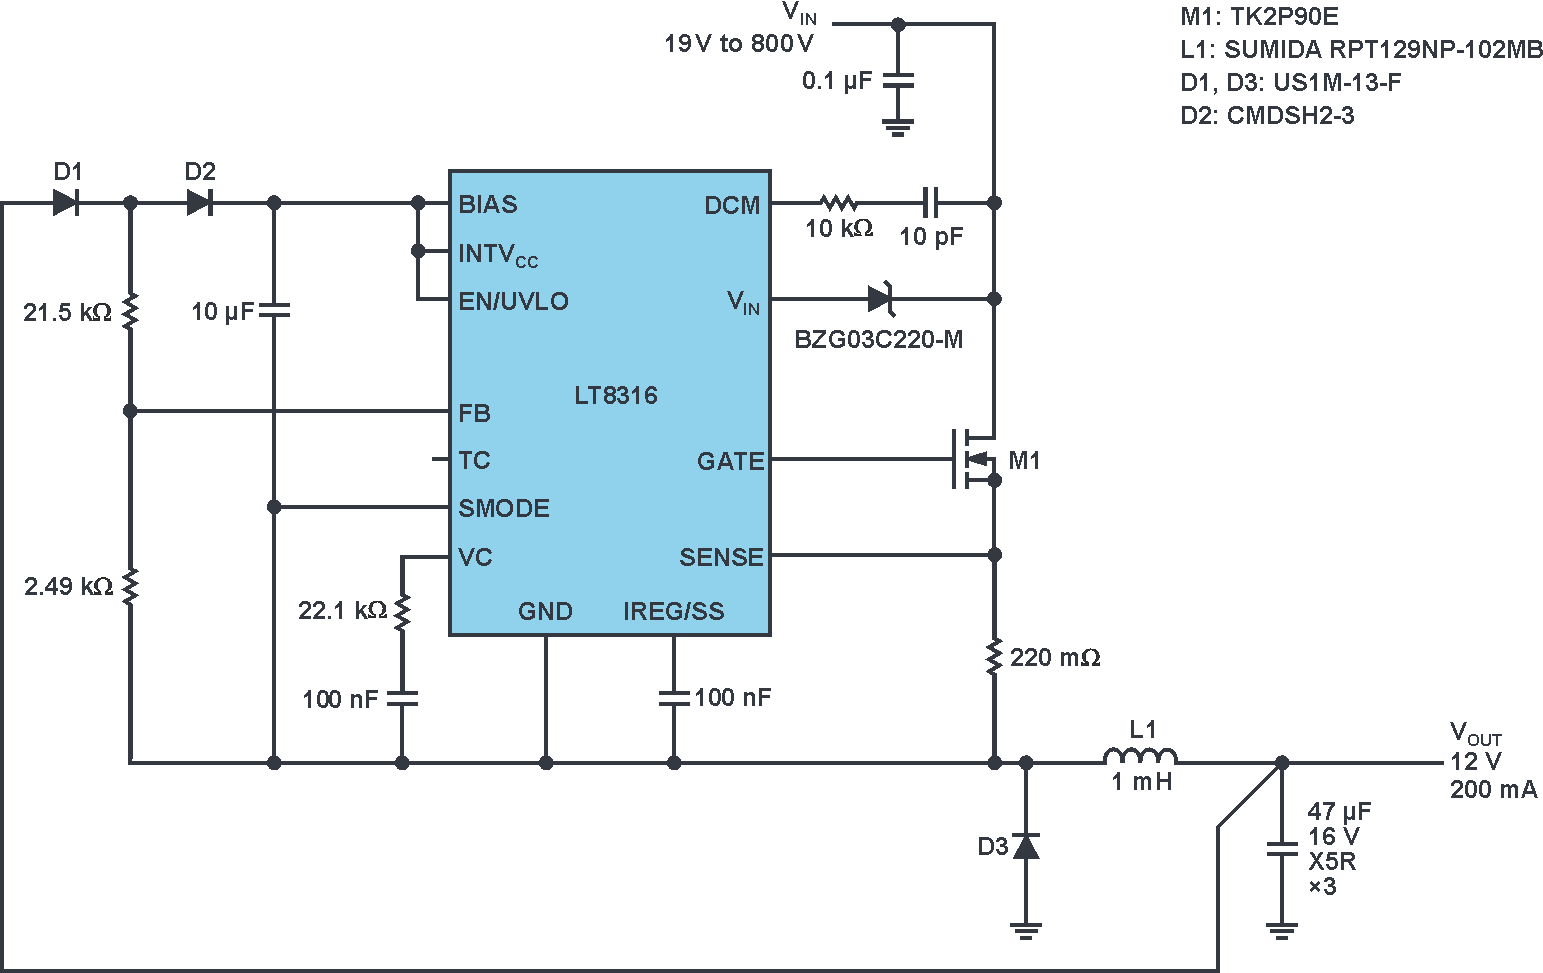 Schematic of a nonisolated buck converter with up to 800 V supply voltage.